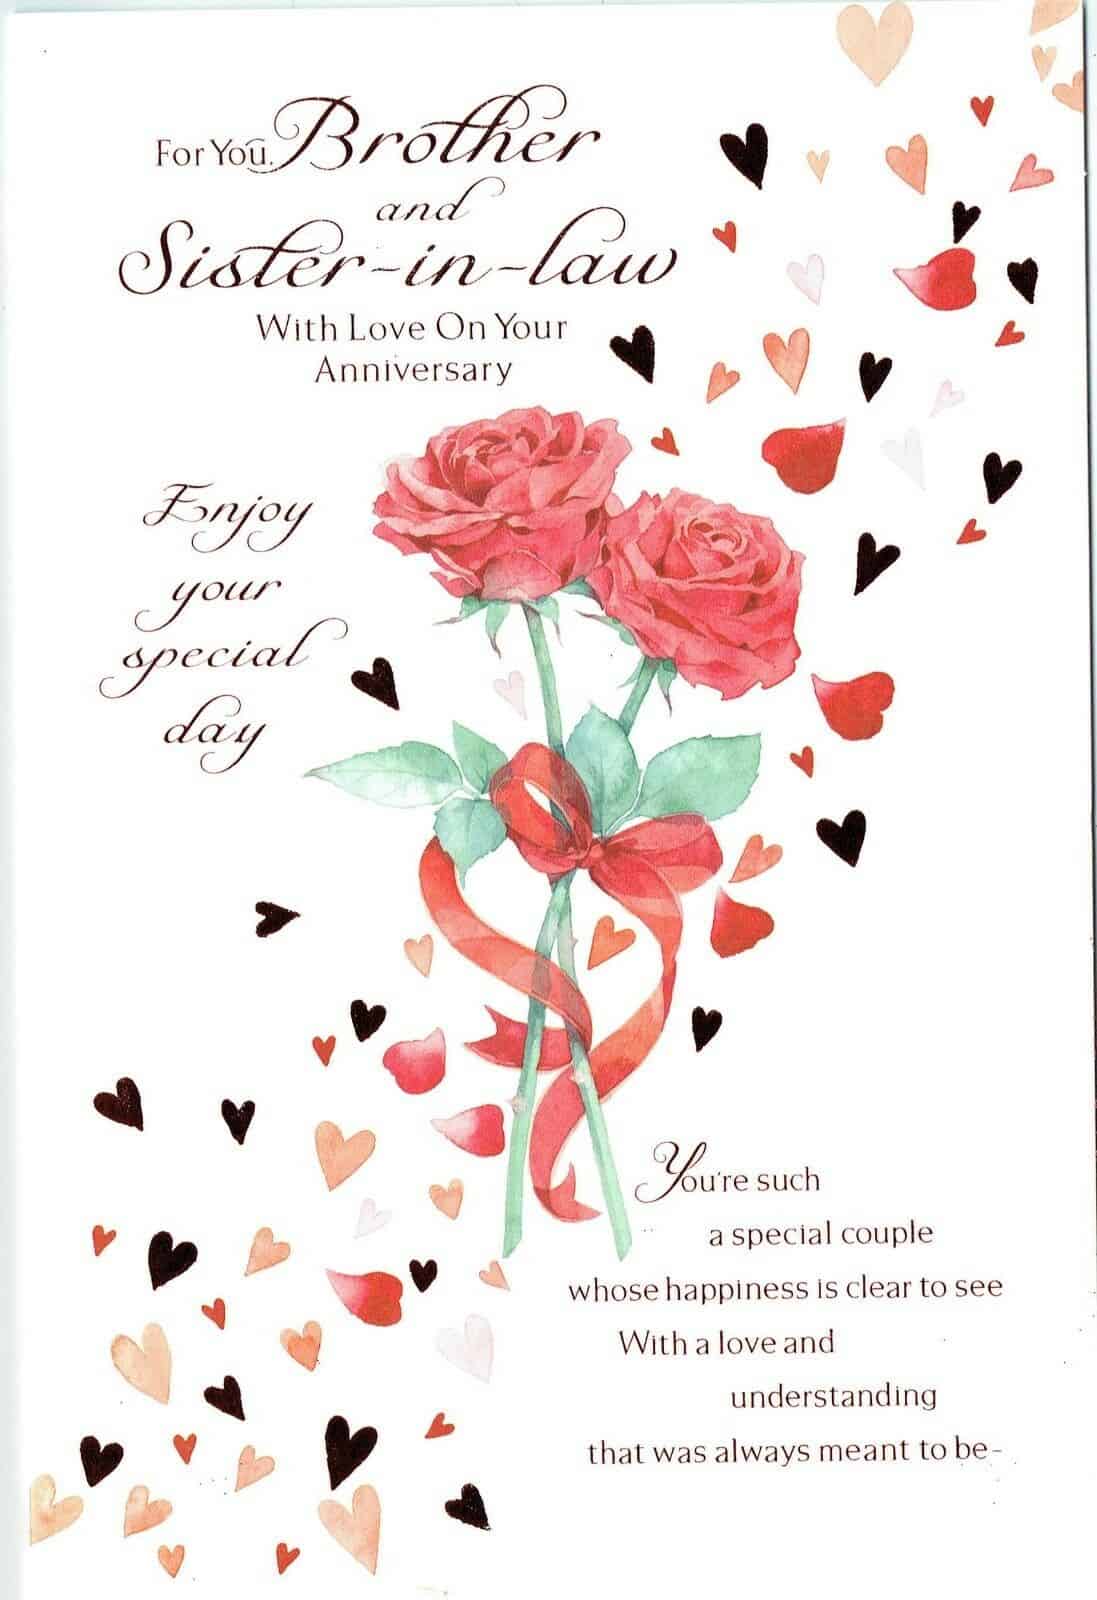  Brother  And Sister  in Law  Anniversary  Card  With Sentiment 